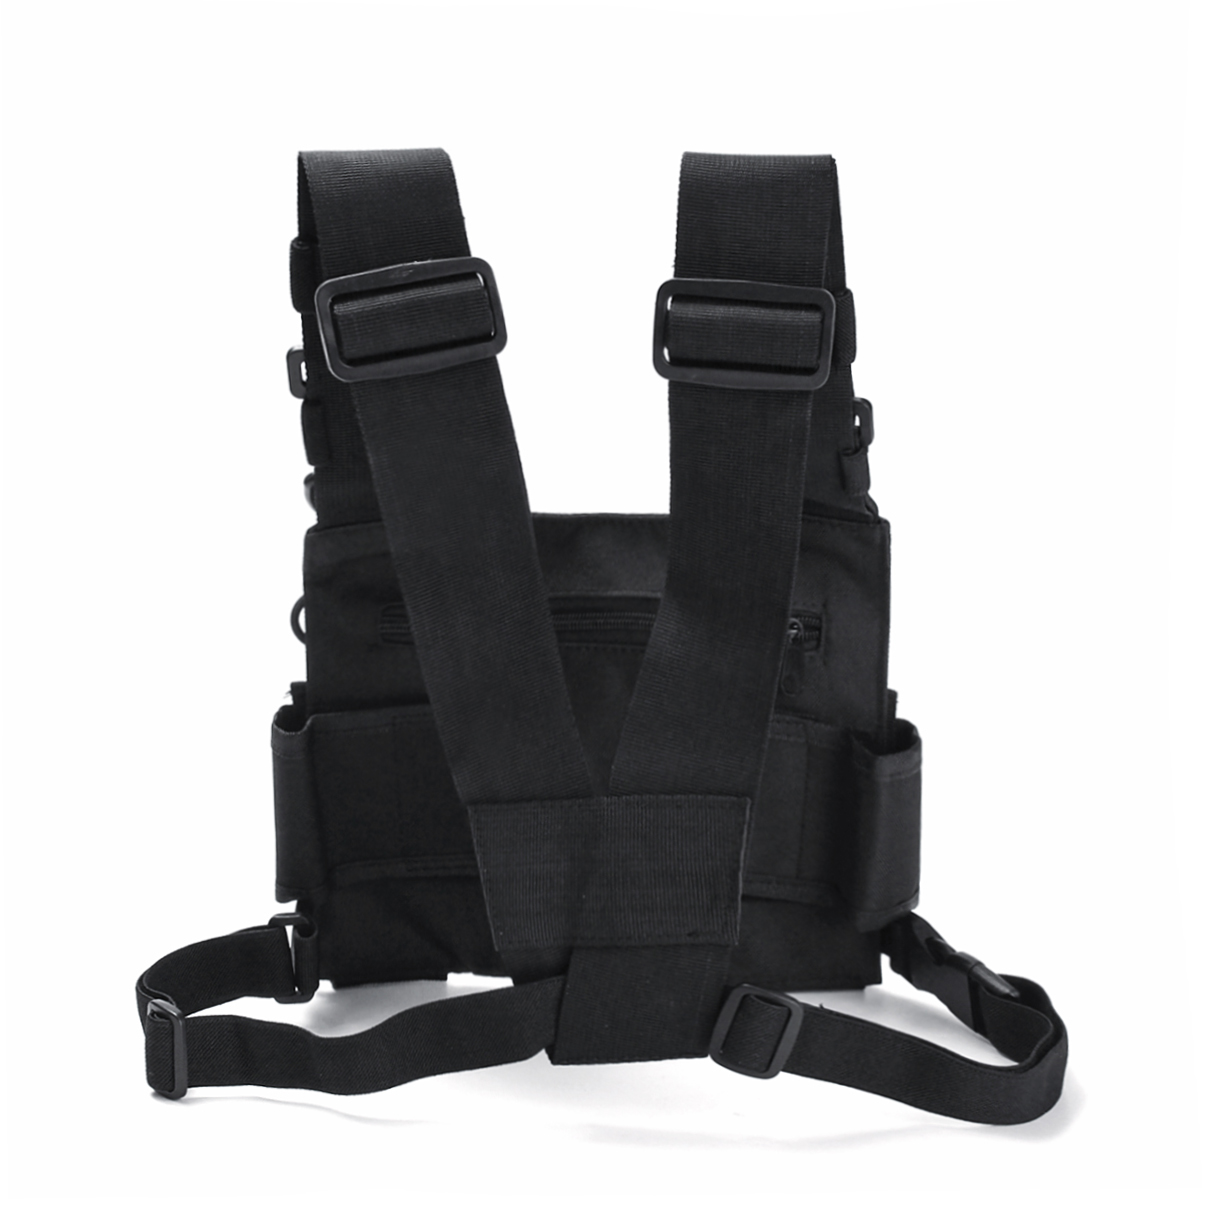 Chest-3-Pocket-Harness-Nylon-Bag-Pack-Backpack-Holster-for-Radio-Walkie-Talkie-Two-Way-Radio-1350160-3